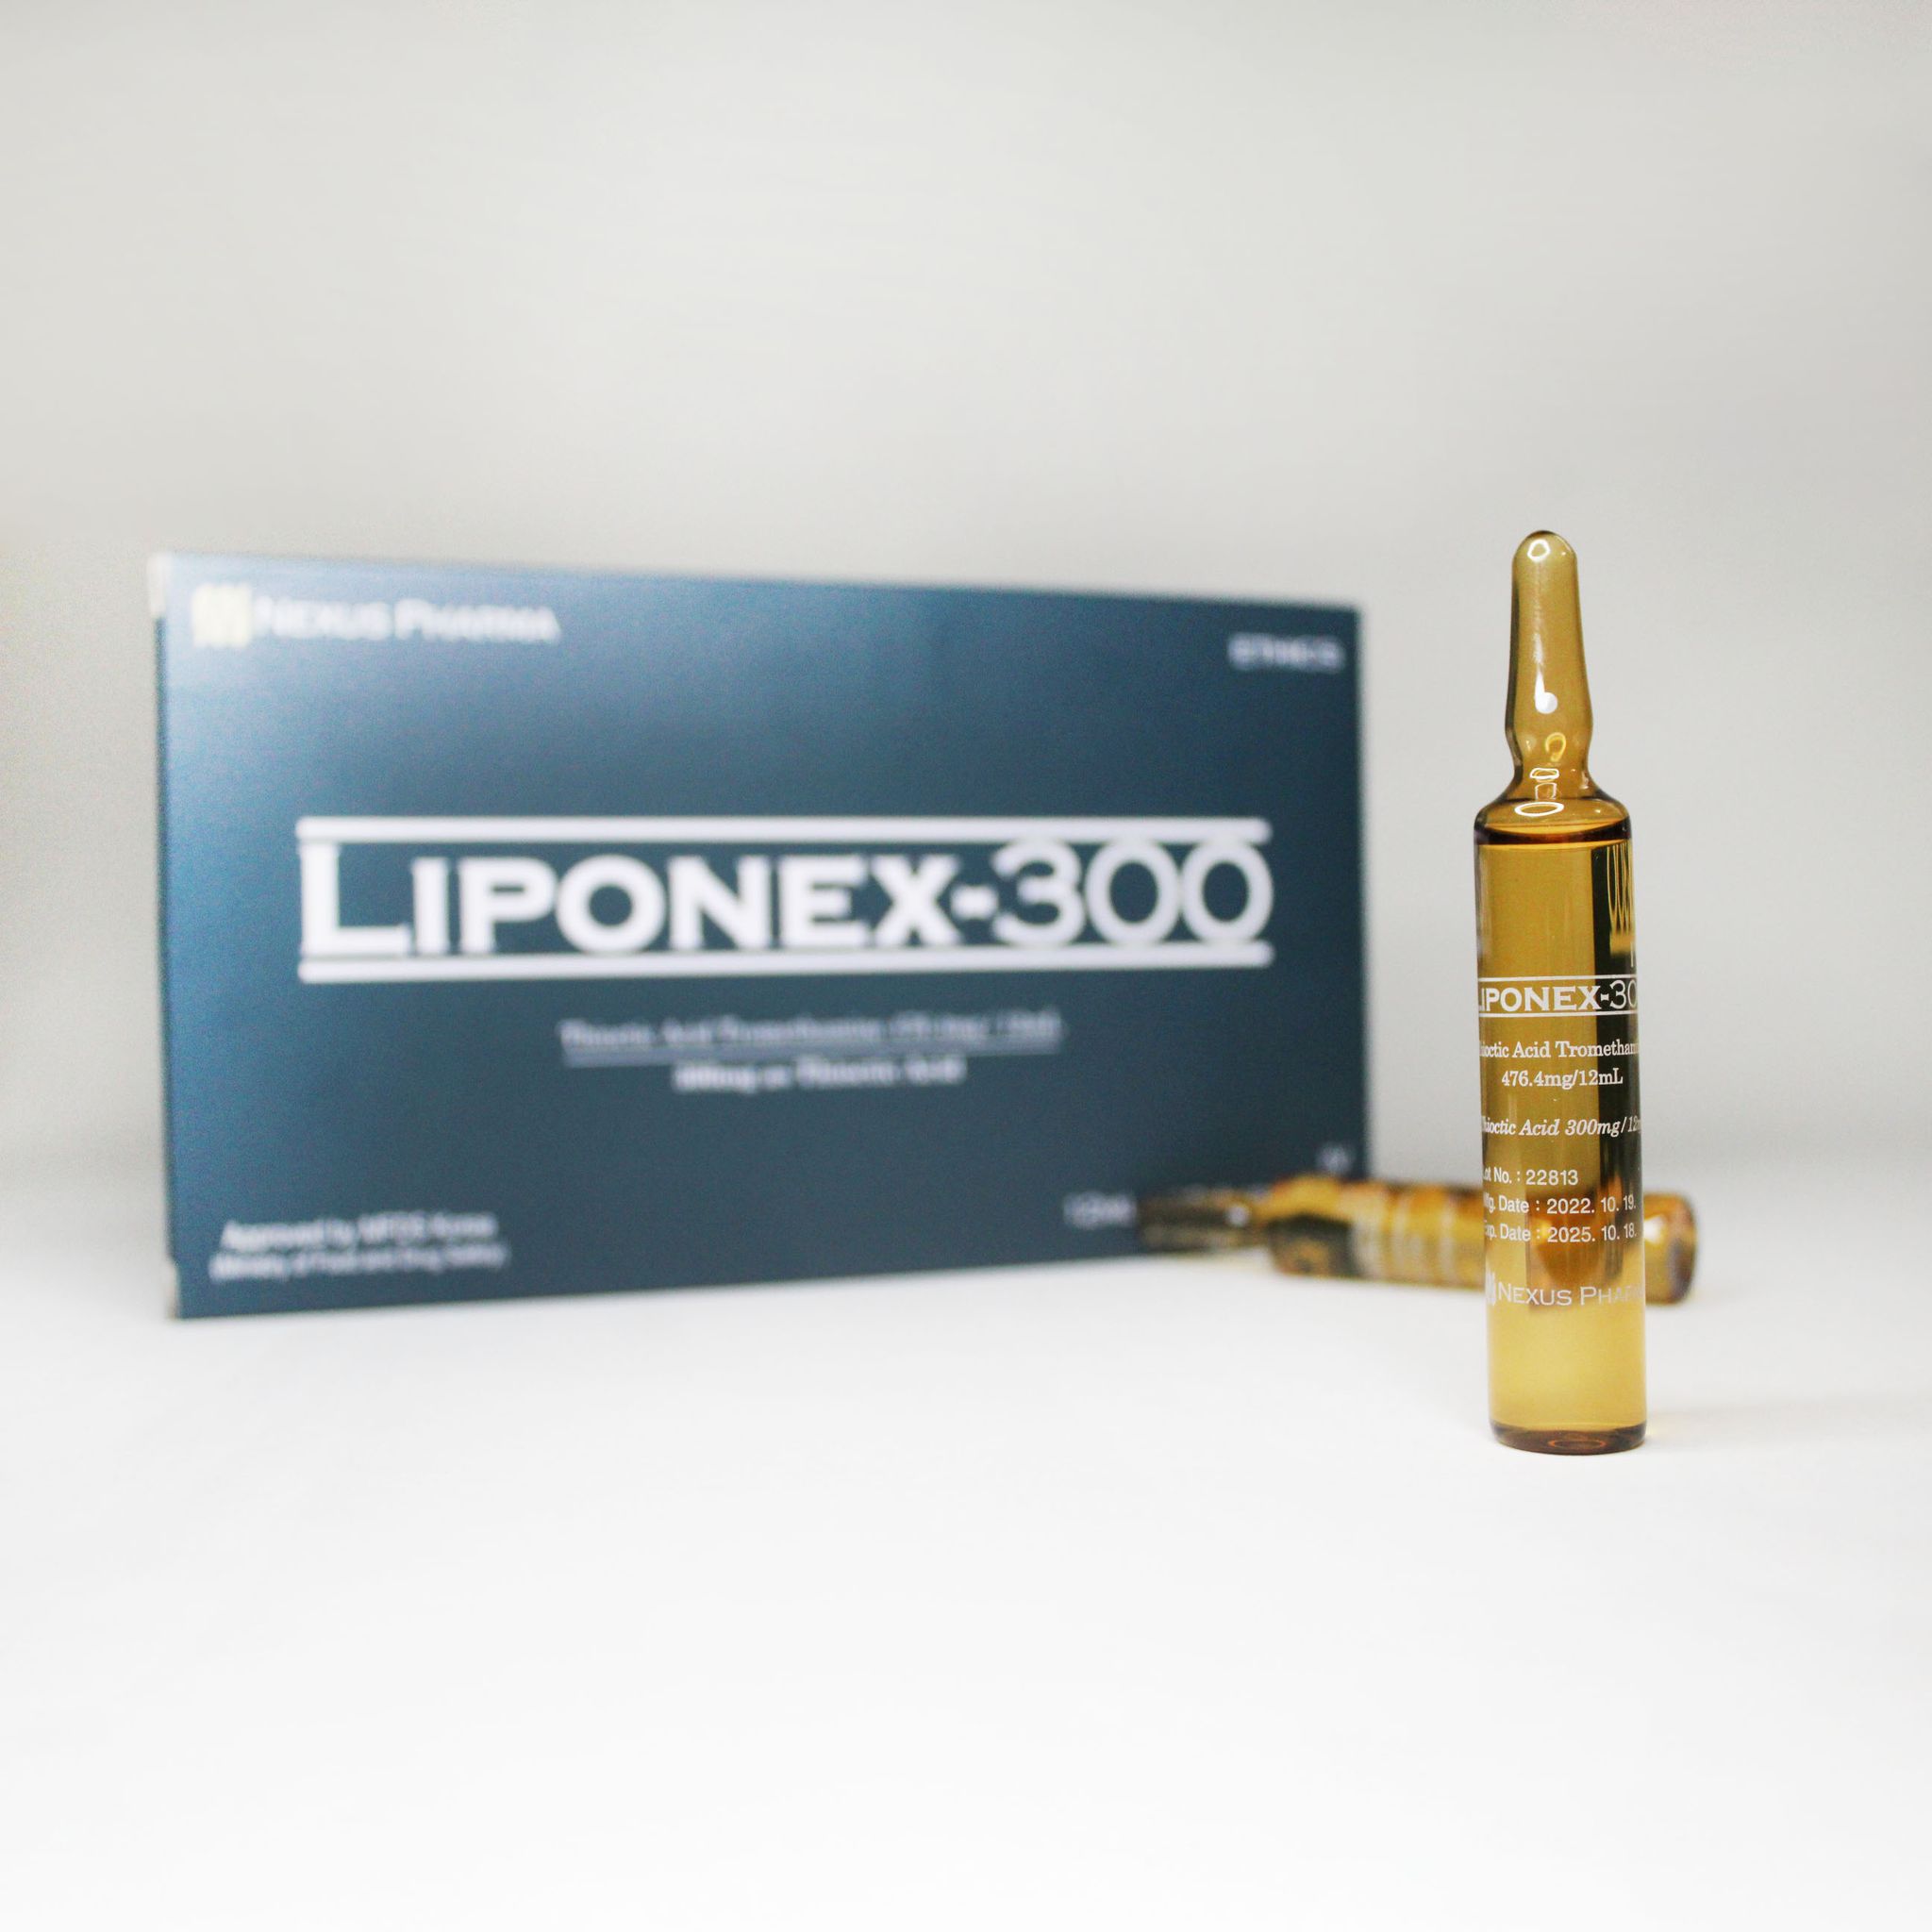 Liponex-300 ampoules in front of box.